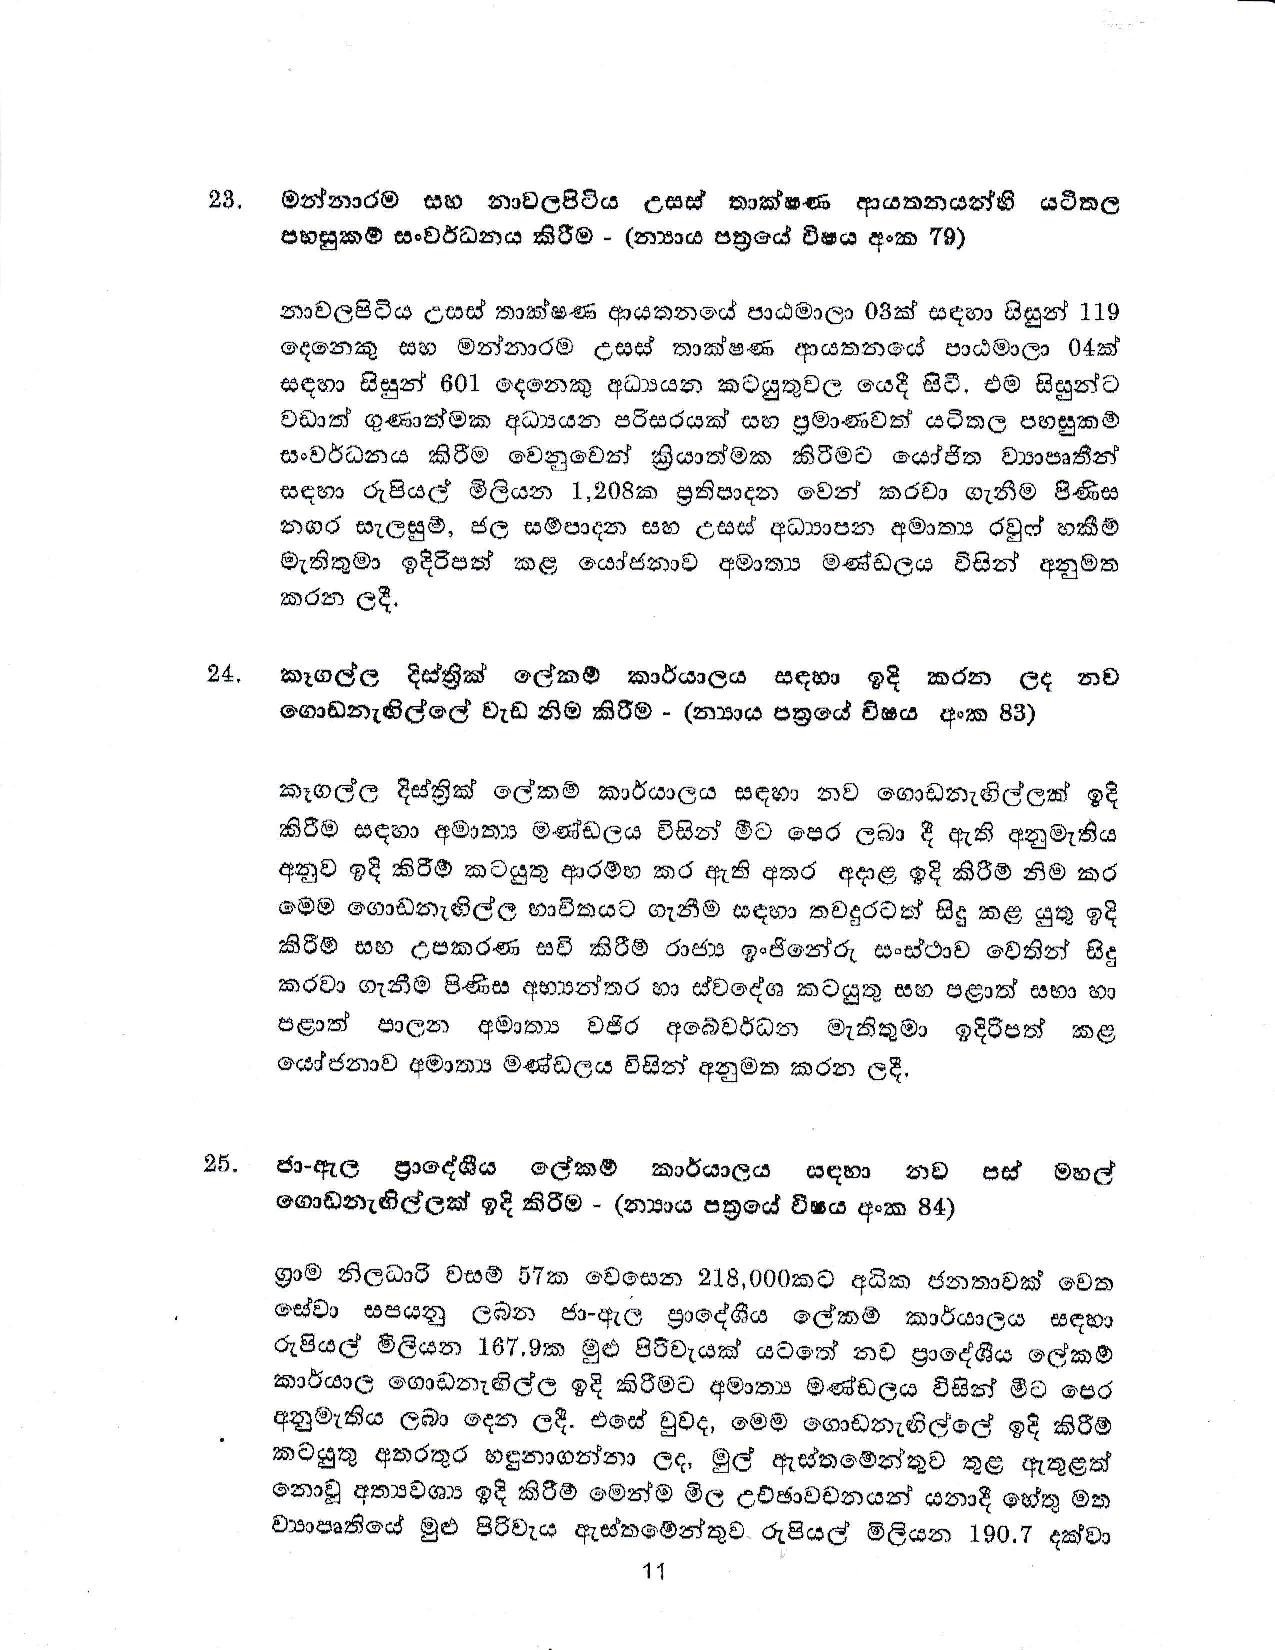 Cabinet Decision on 30.04.2019 page 011